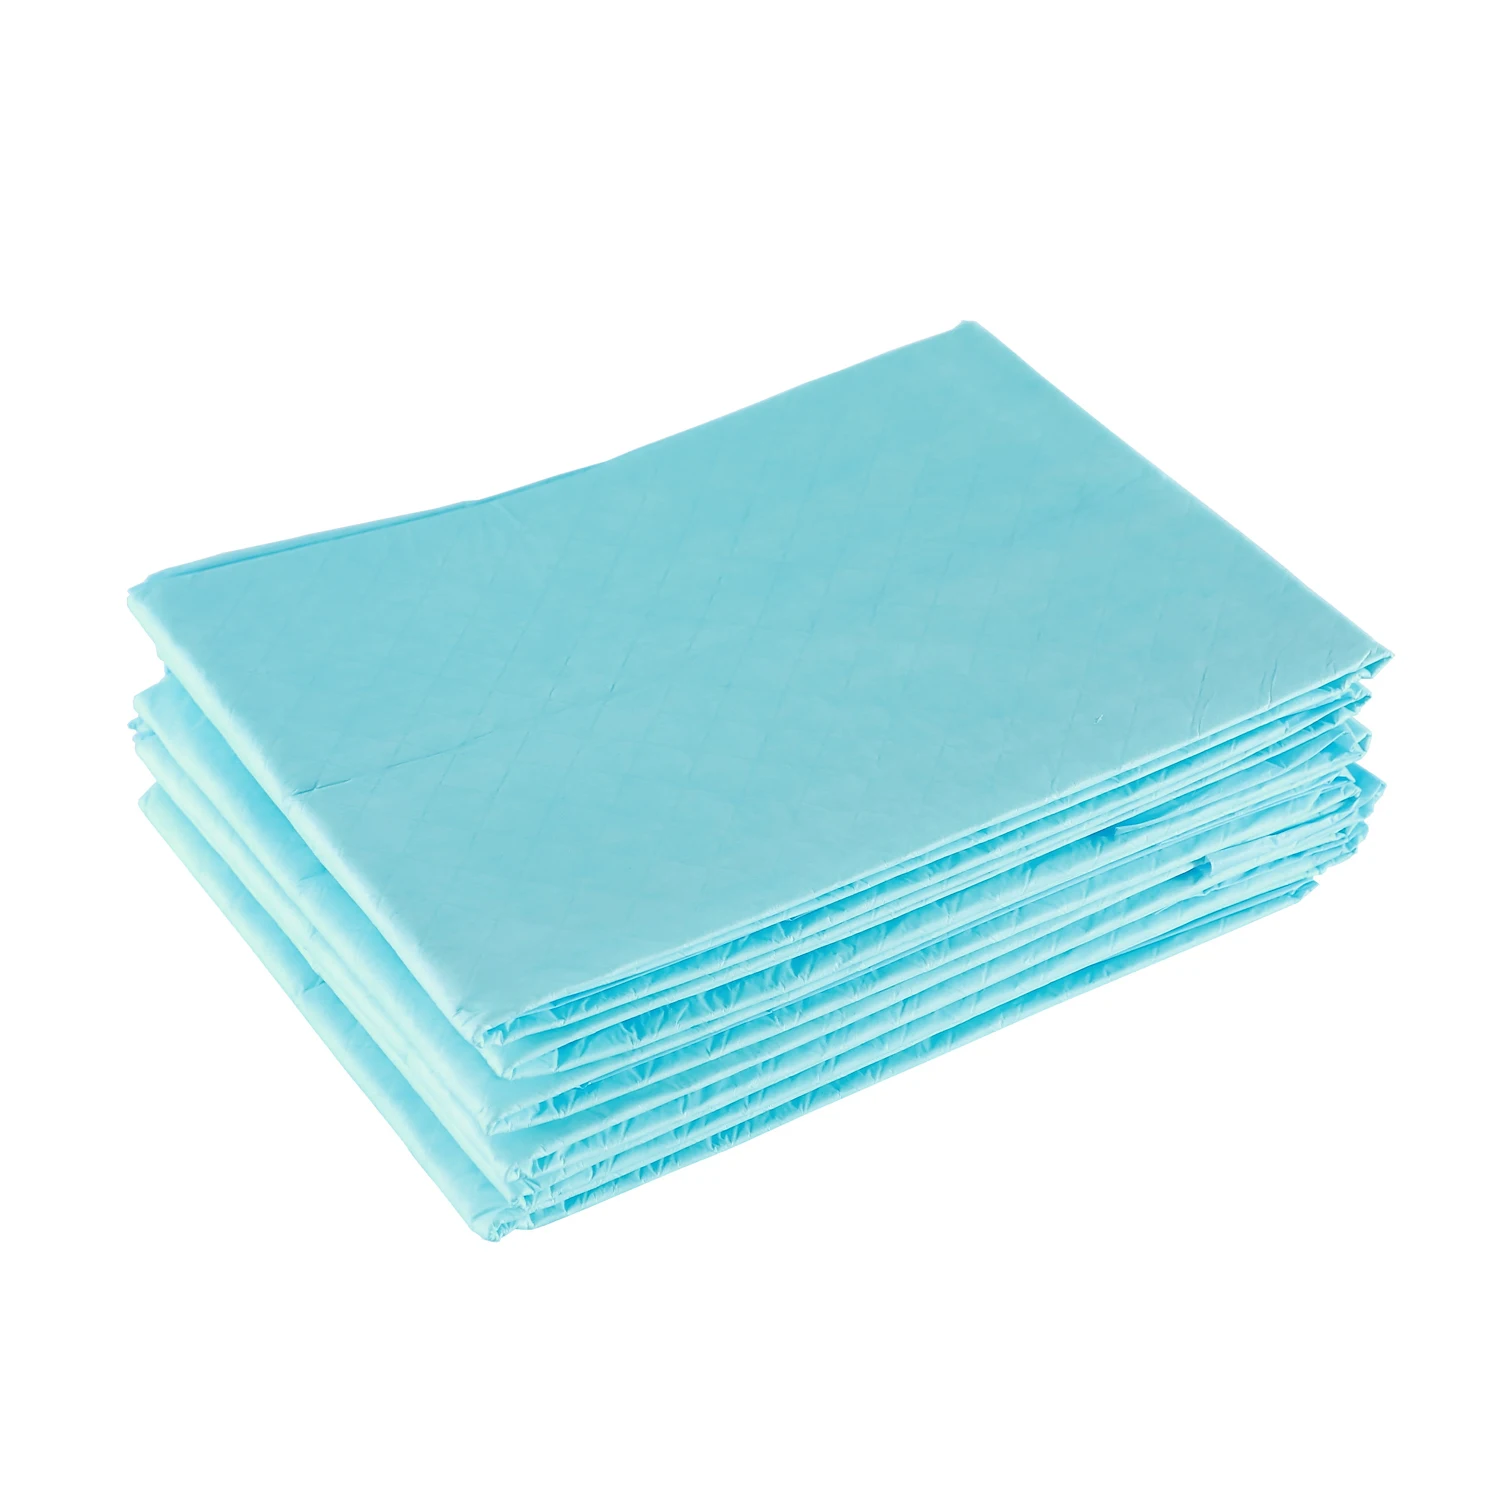 60x90 Cm Surgical Nonwoven Disposable Underpad For Personal Care And ...